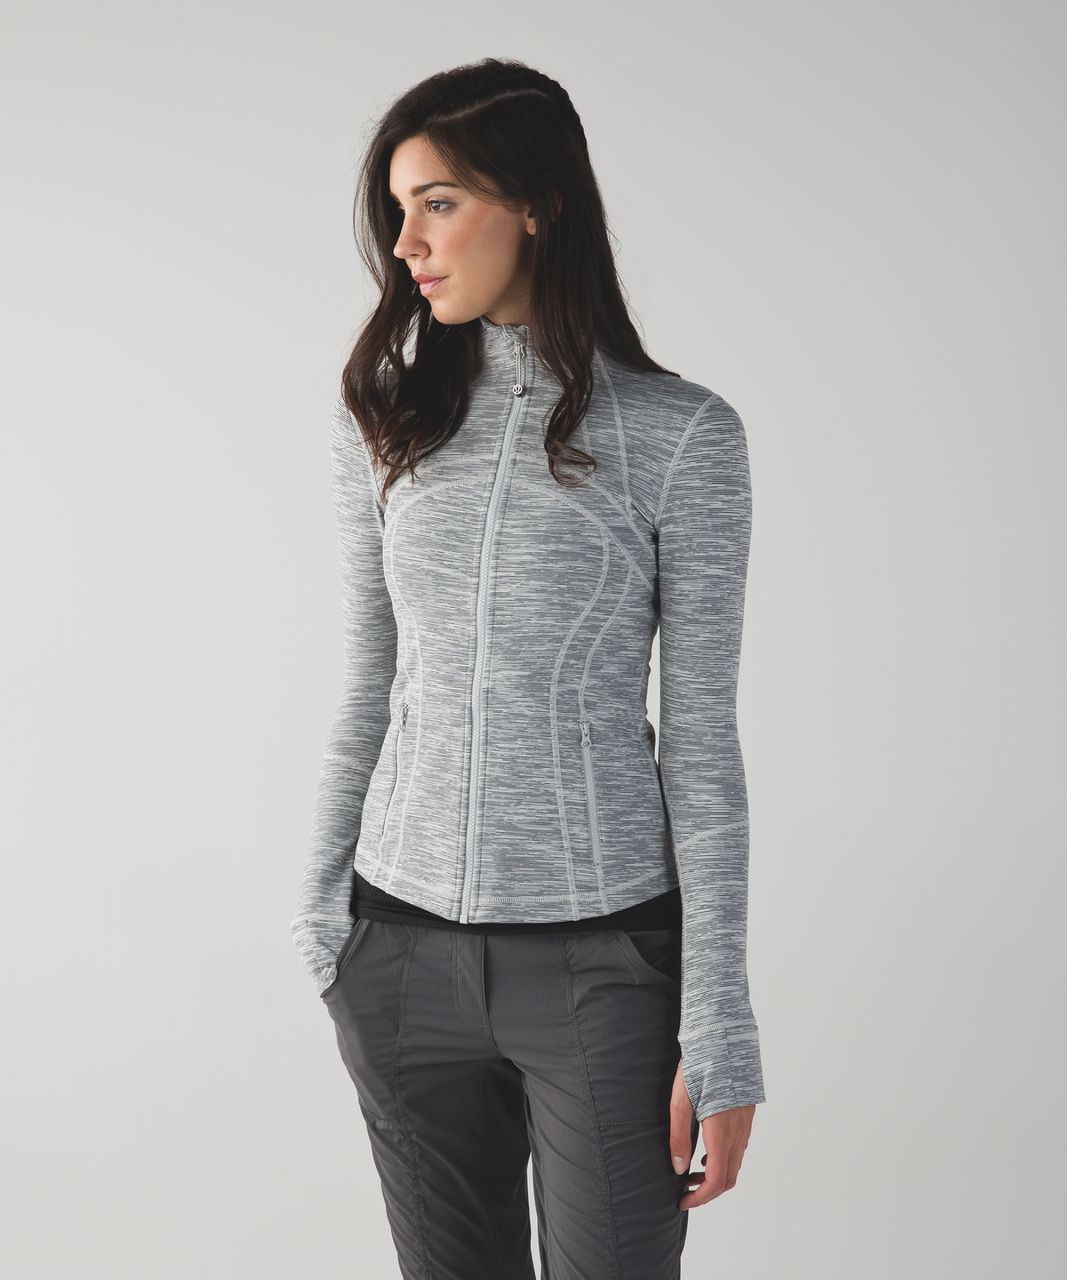 Lululemon Define Jacket - Wee Are From Space Silver Spoon